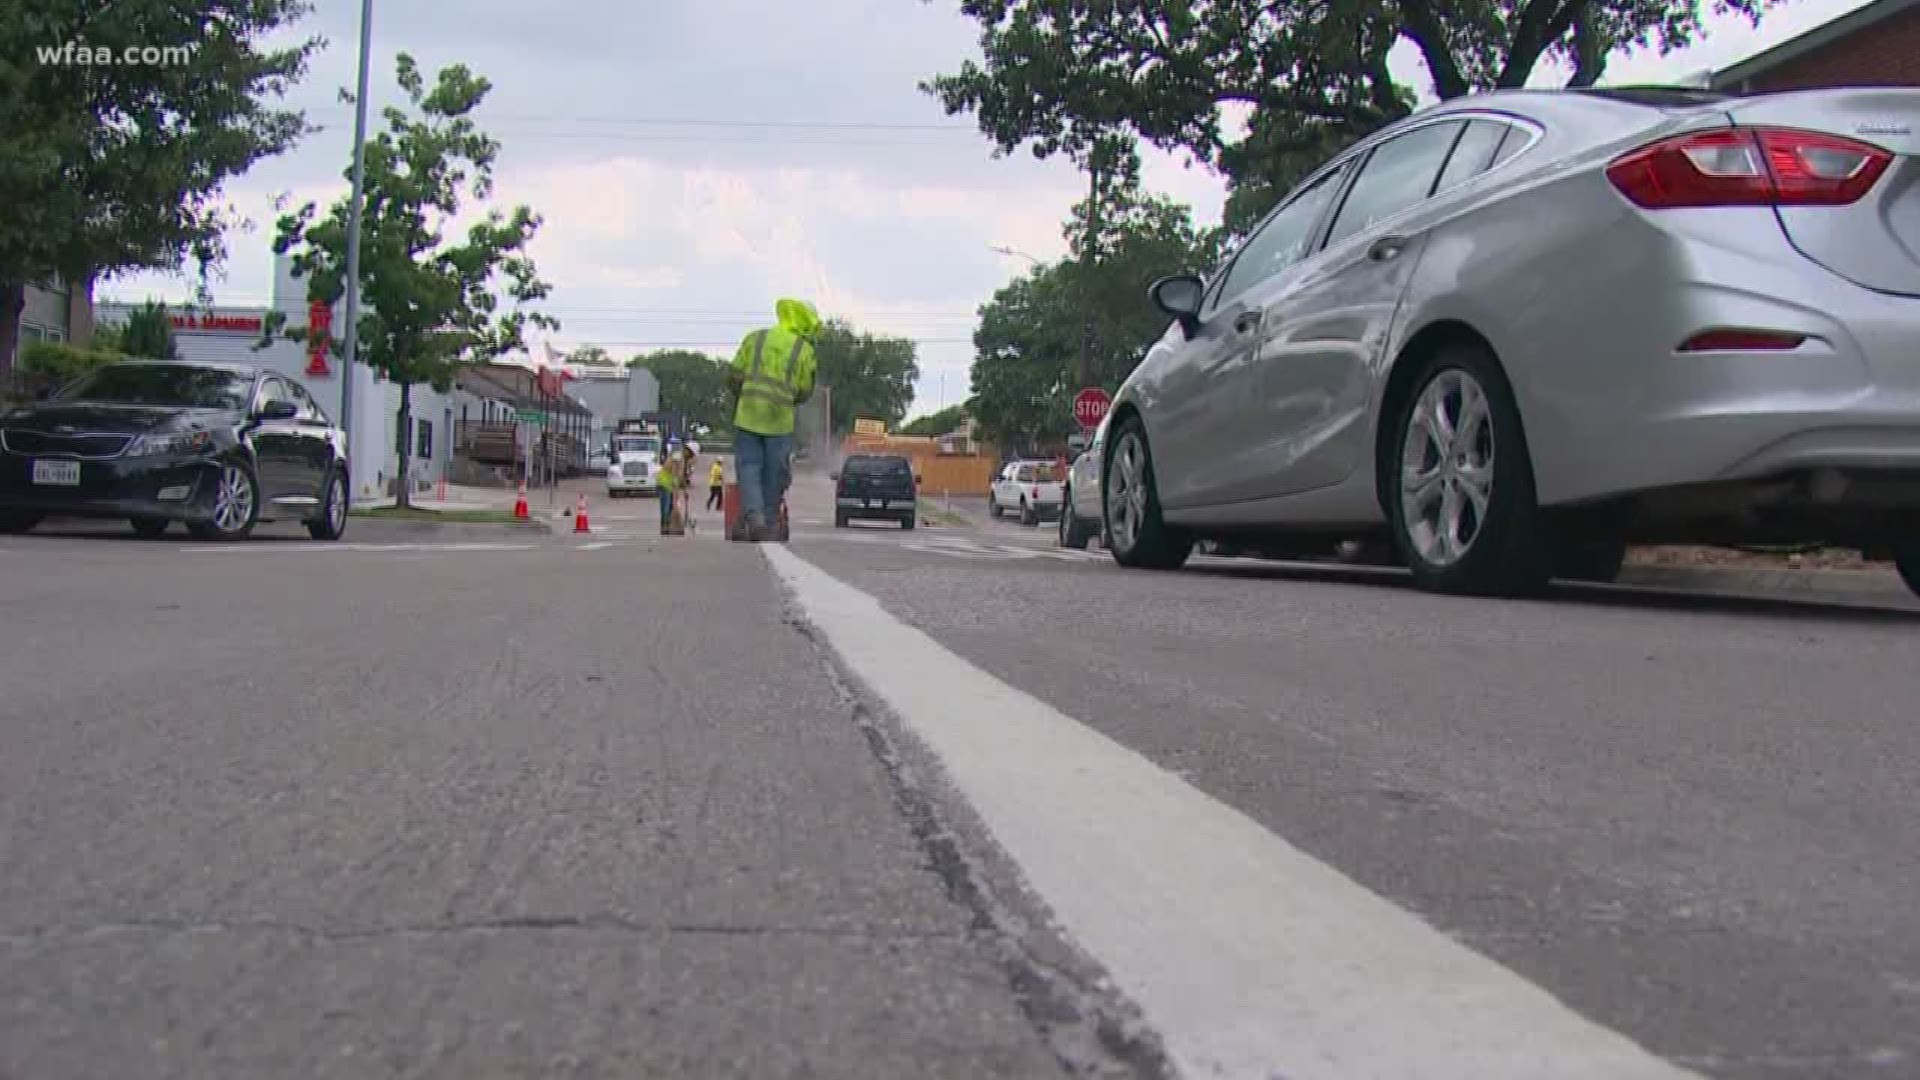 Mistake turns FW roads into one-way streets too early